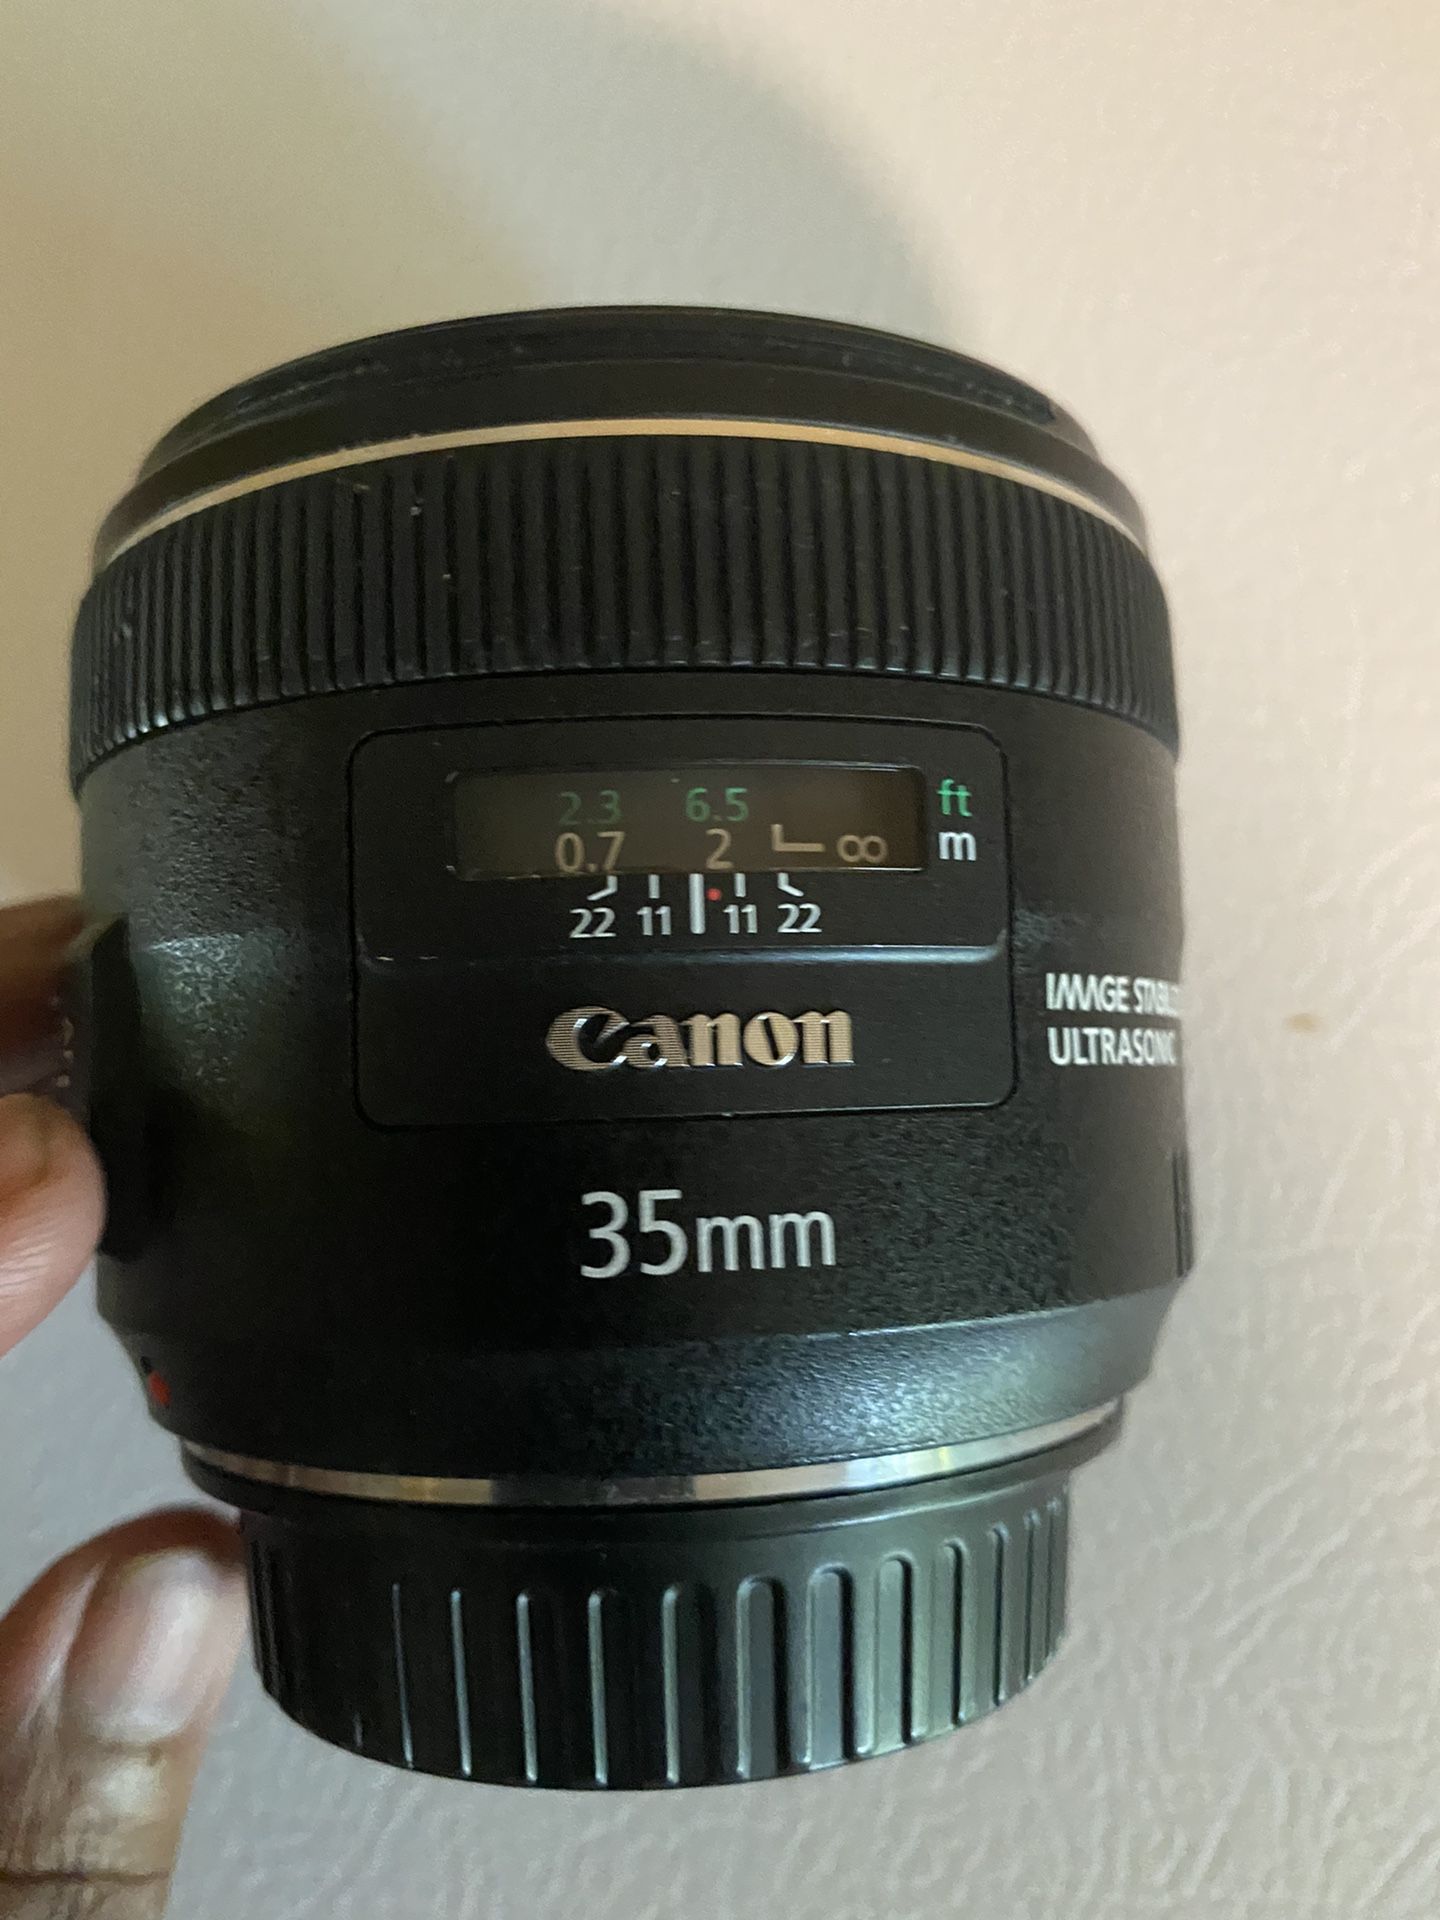 Canon EF 35 mm with image stabilization